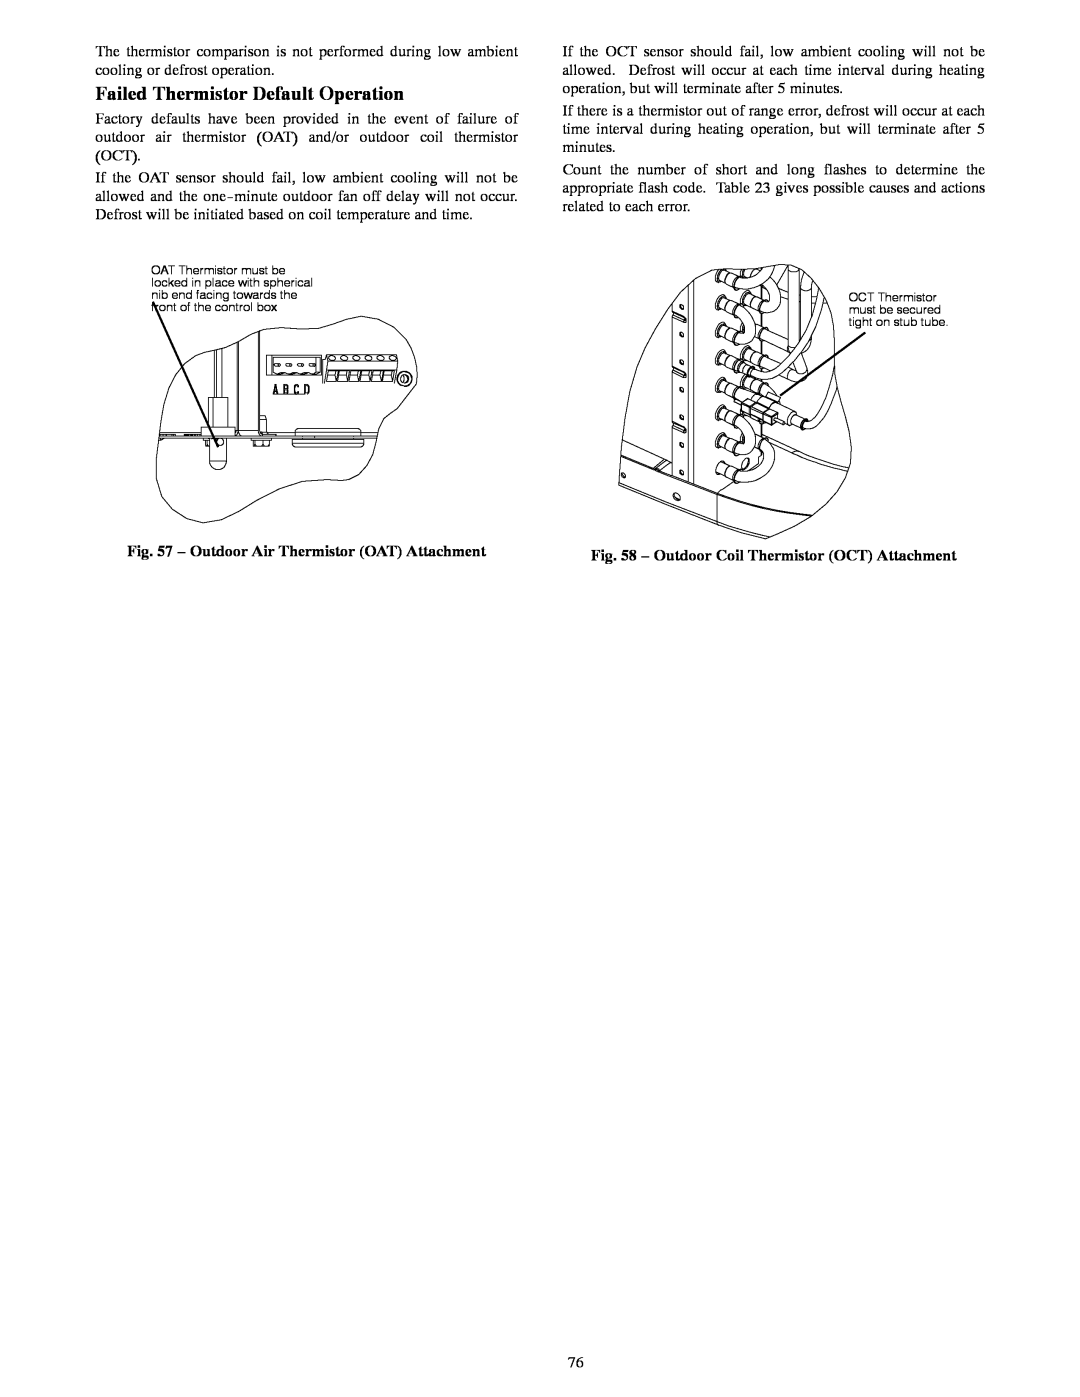 Bryant R-22 service manual Failed Thermistor Default Operation, Outdoor Air Thermistor OAT Attachment 